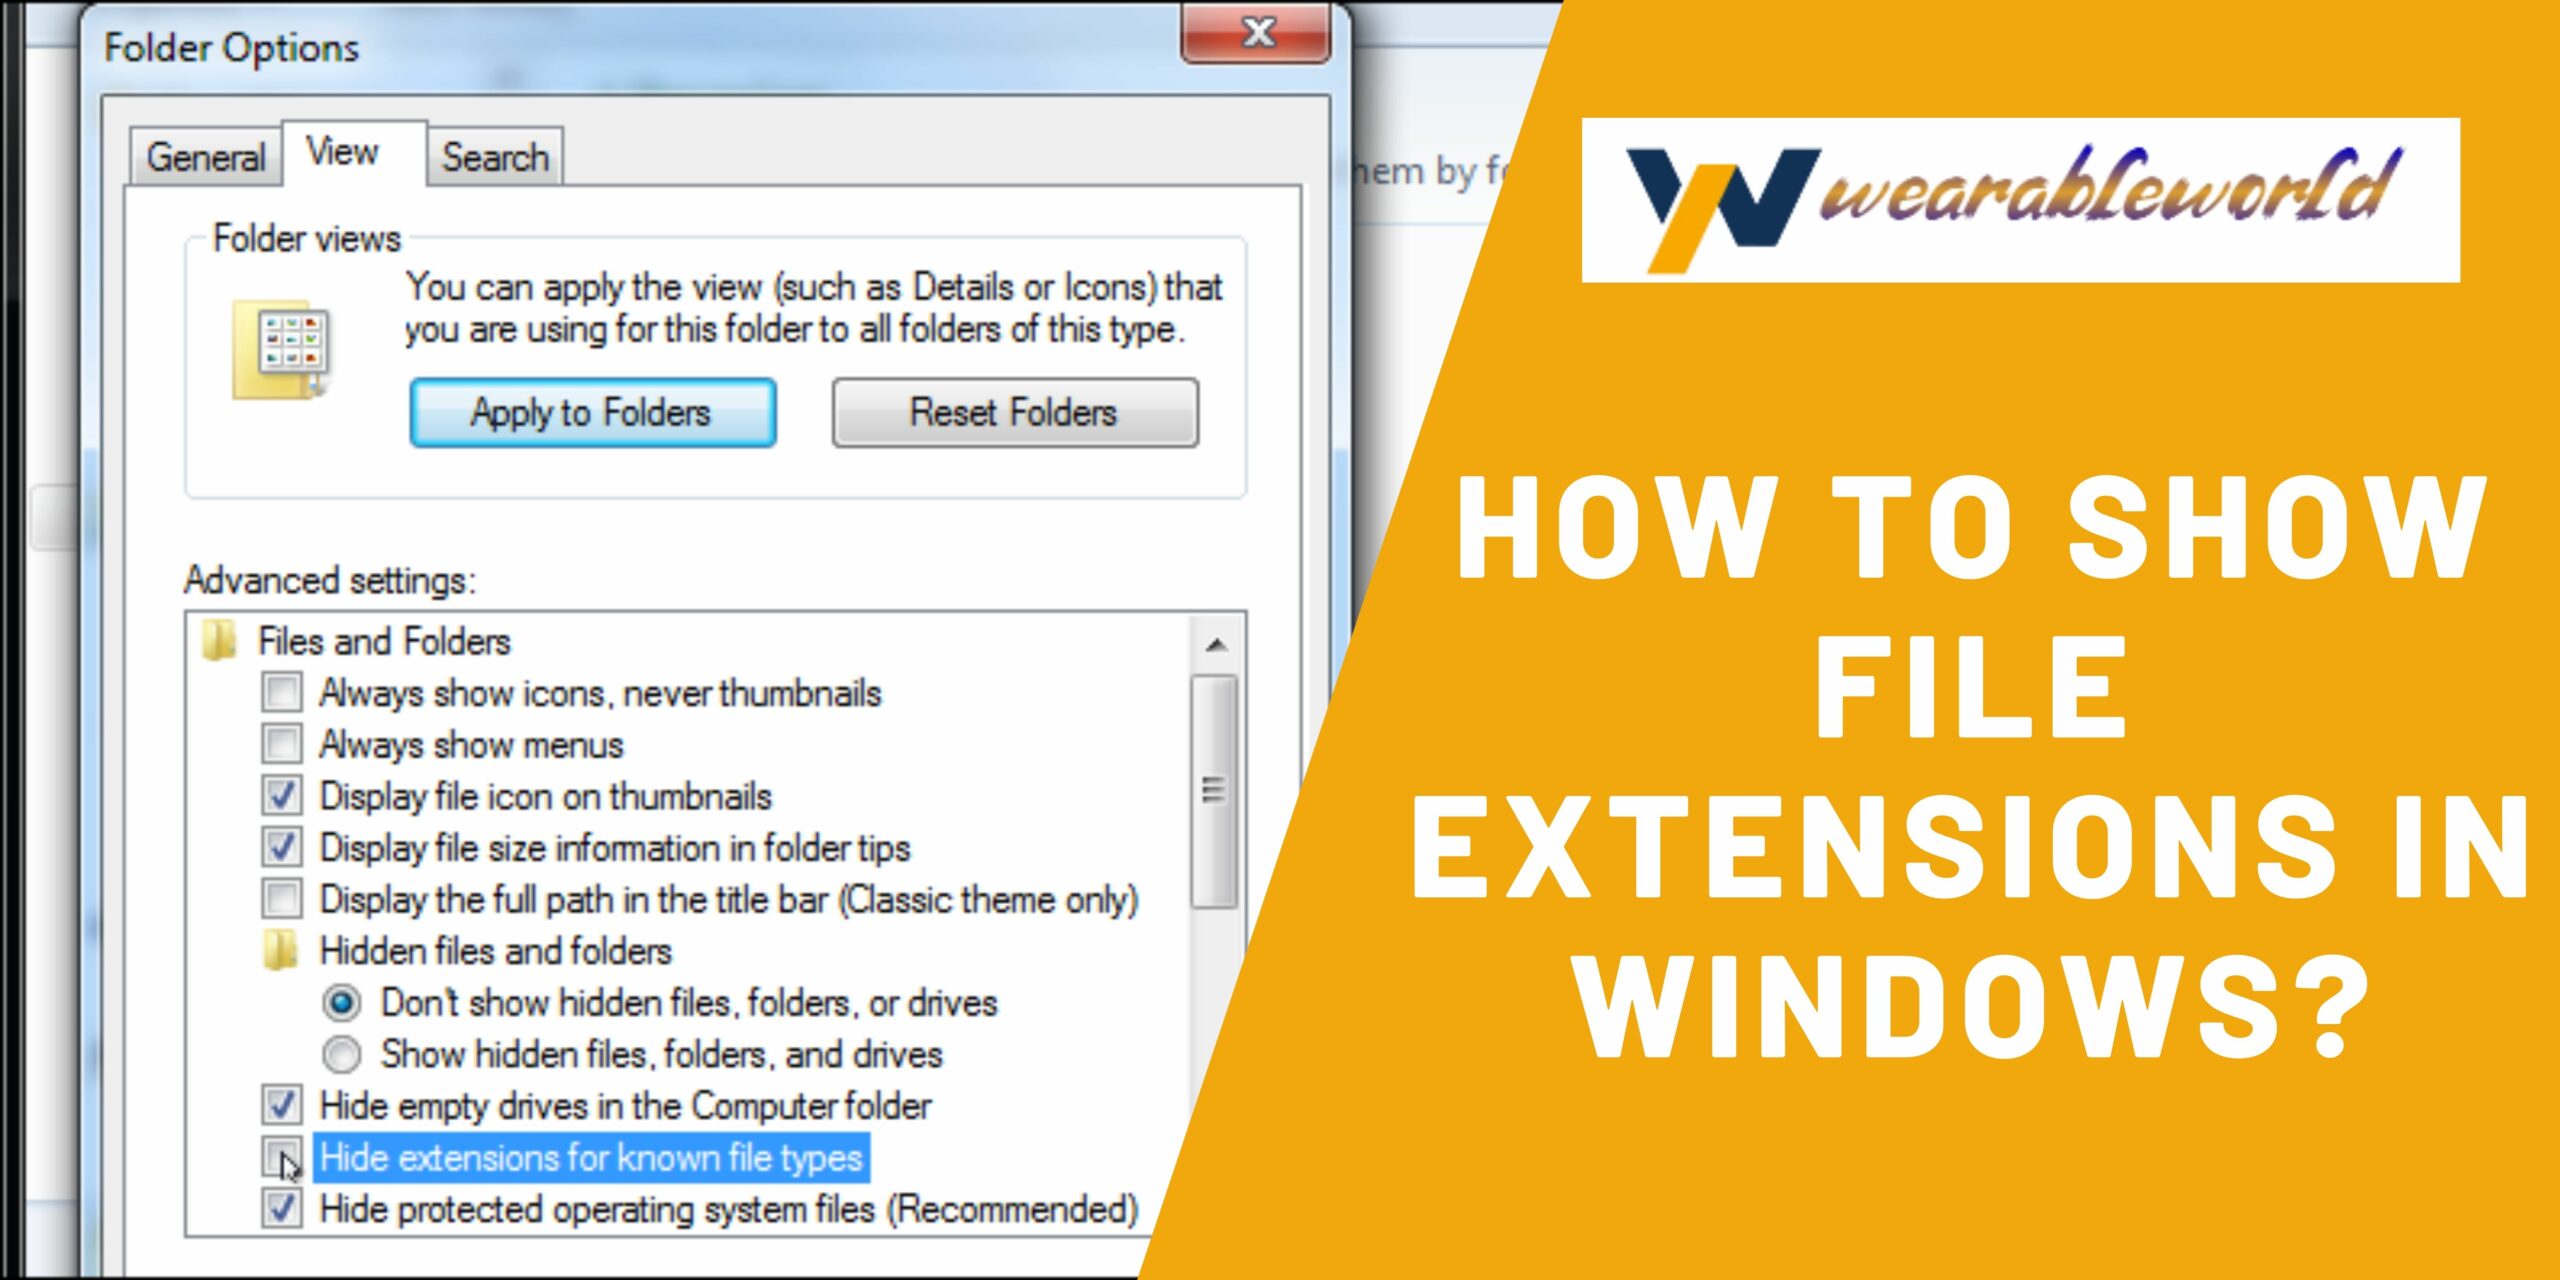 Show file extensions in Windows